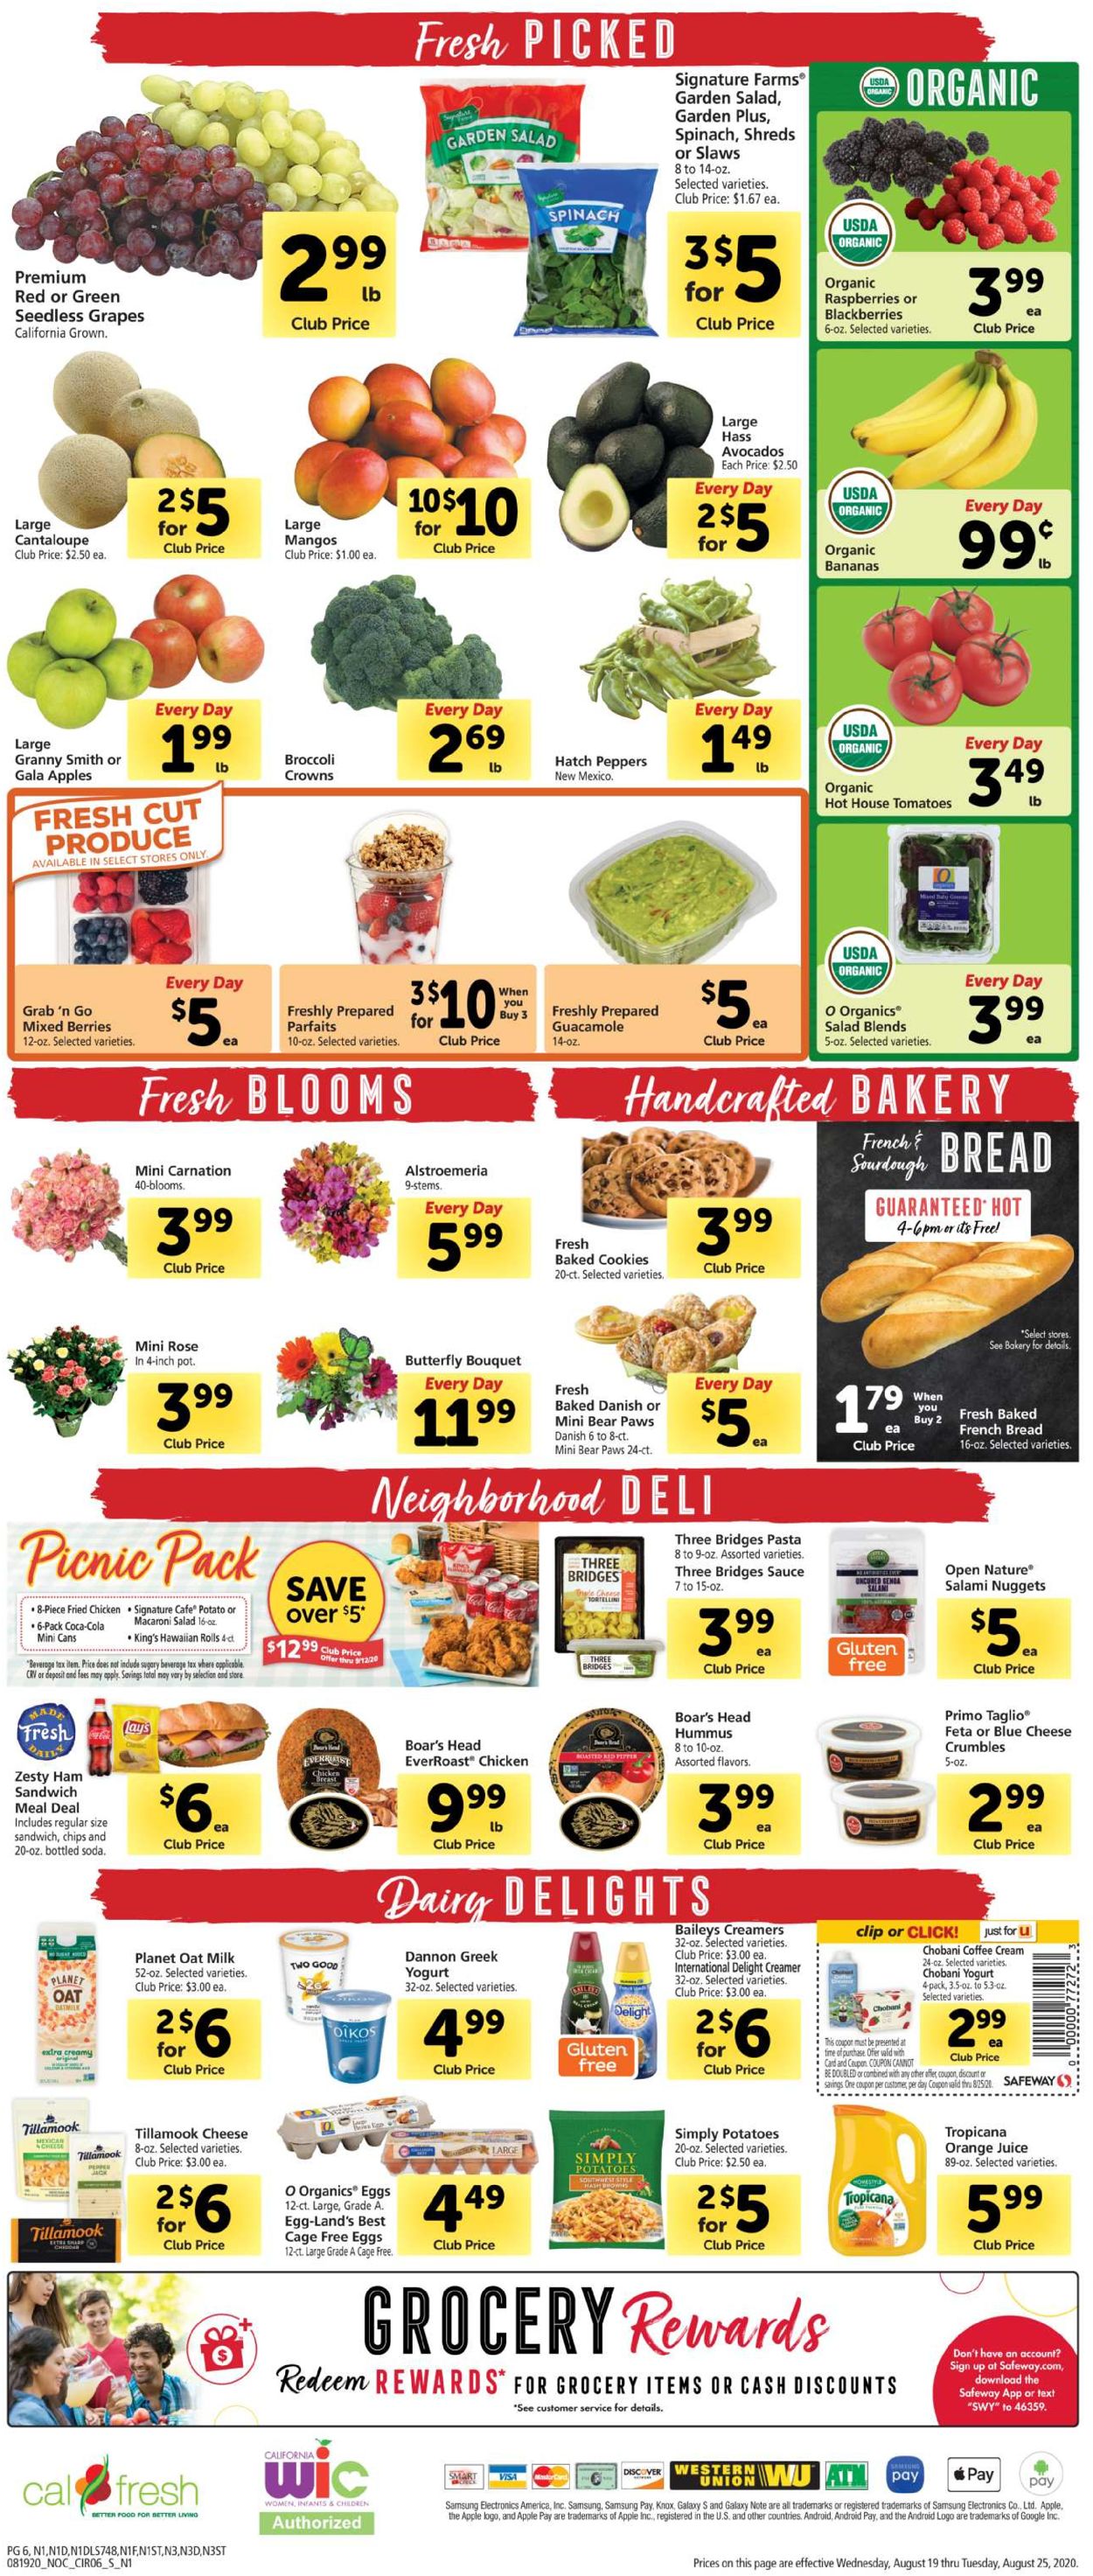 Catalogue Safeway from 08/19/2020